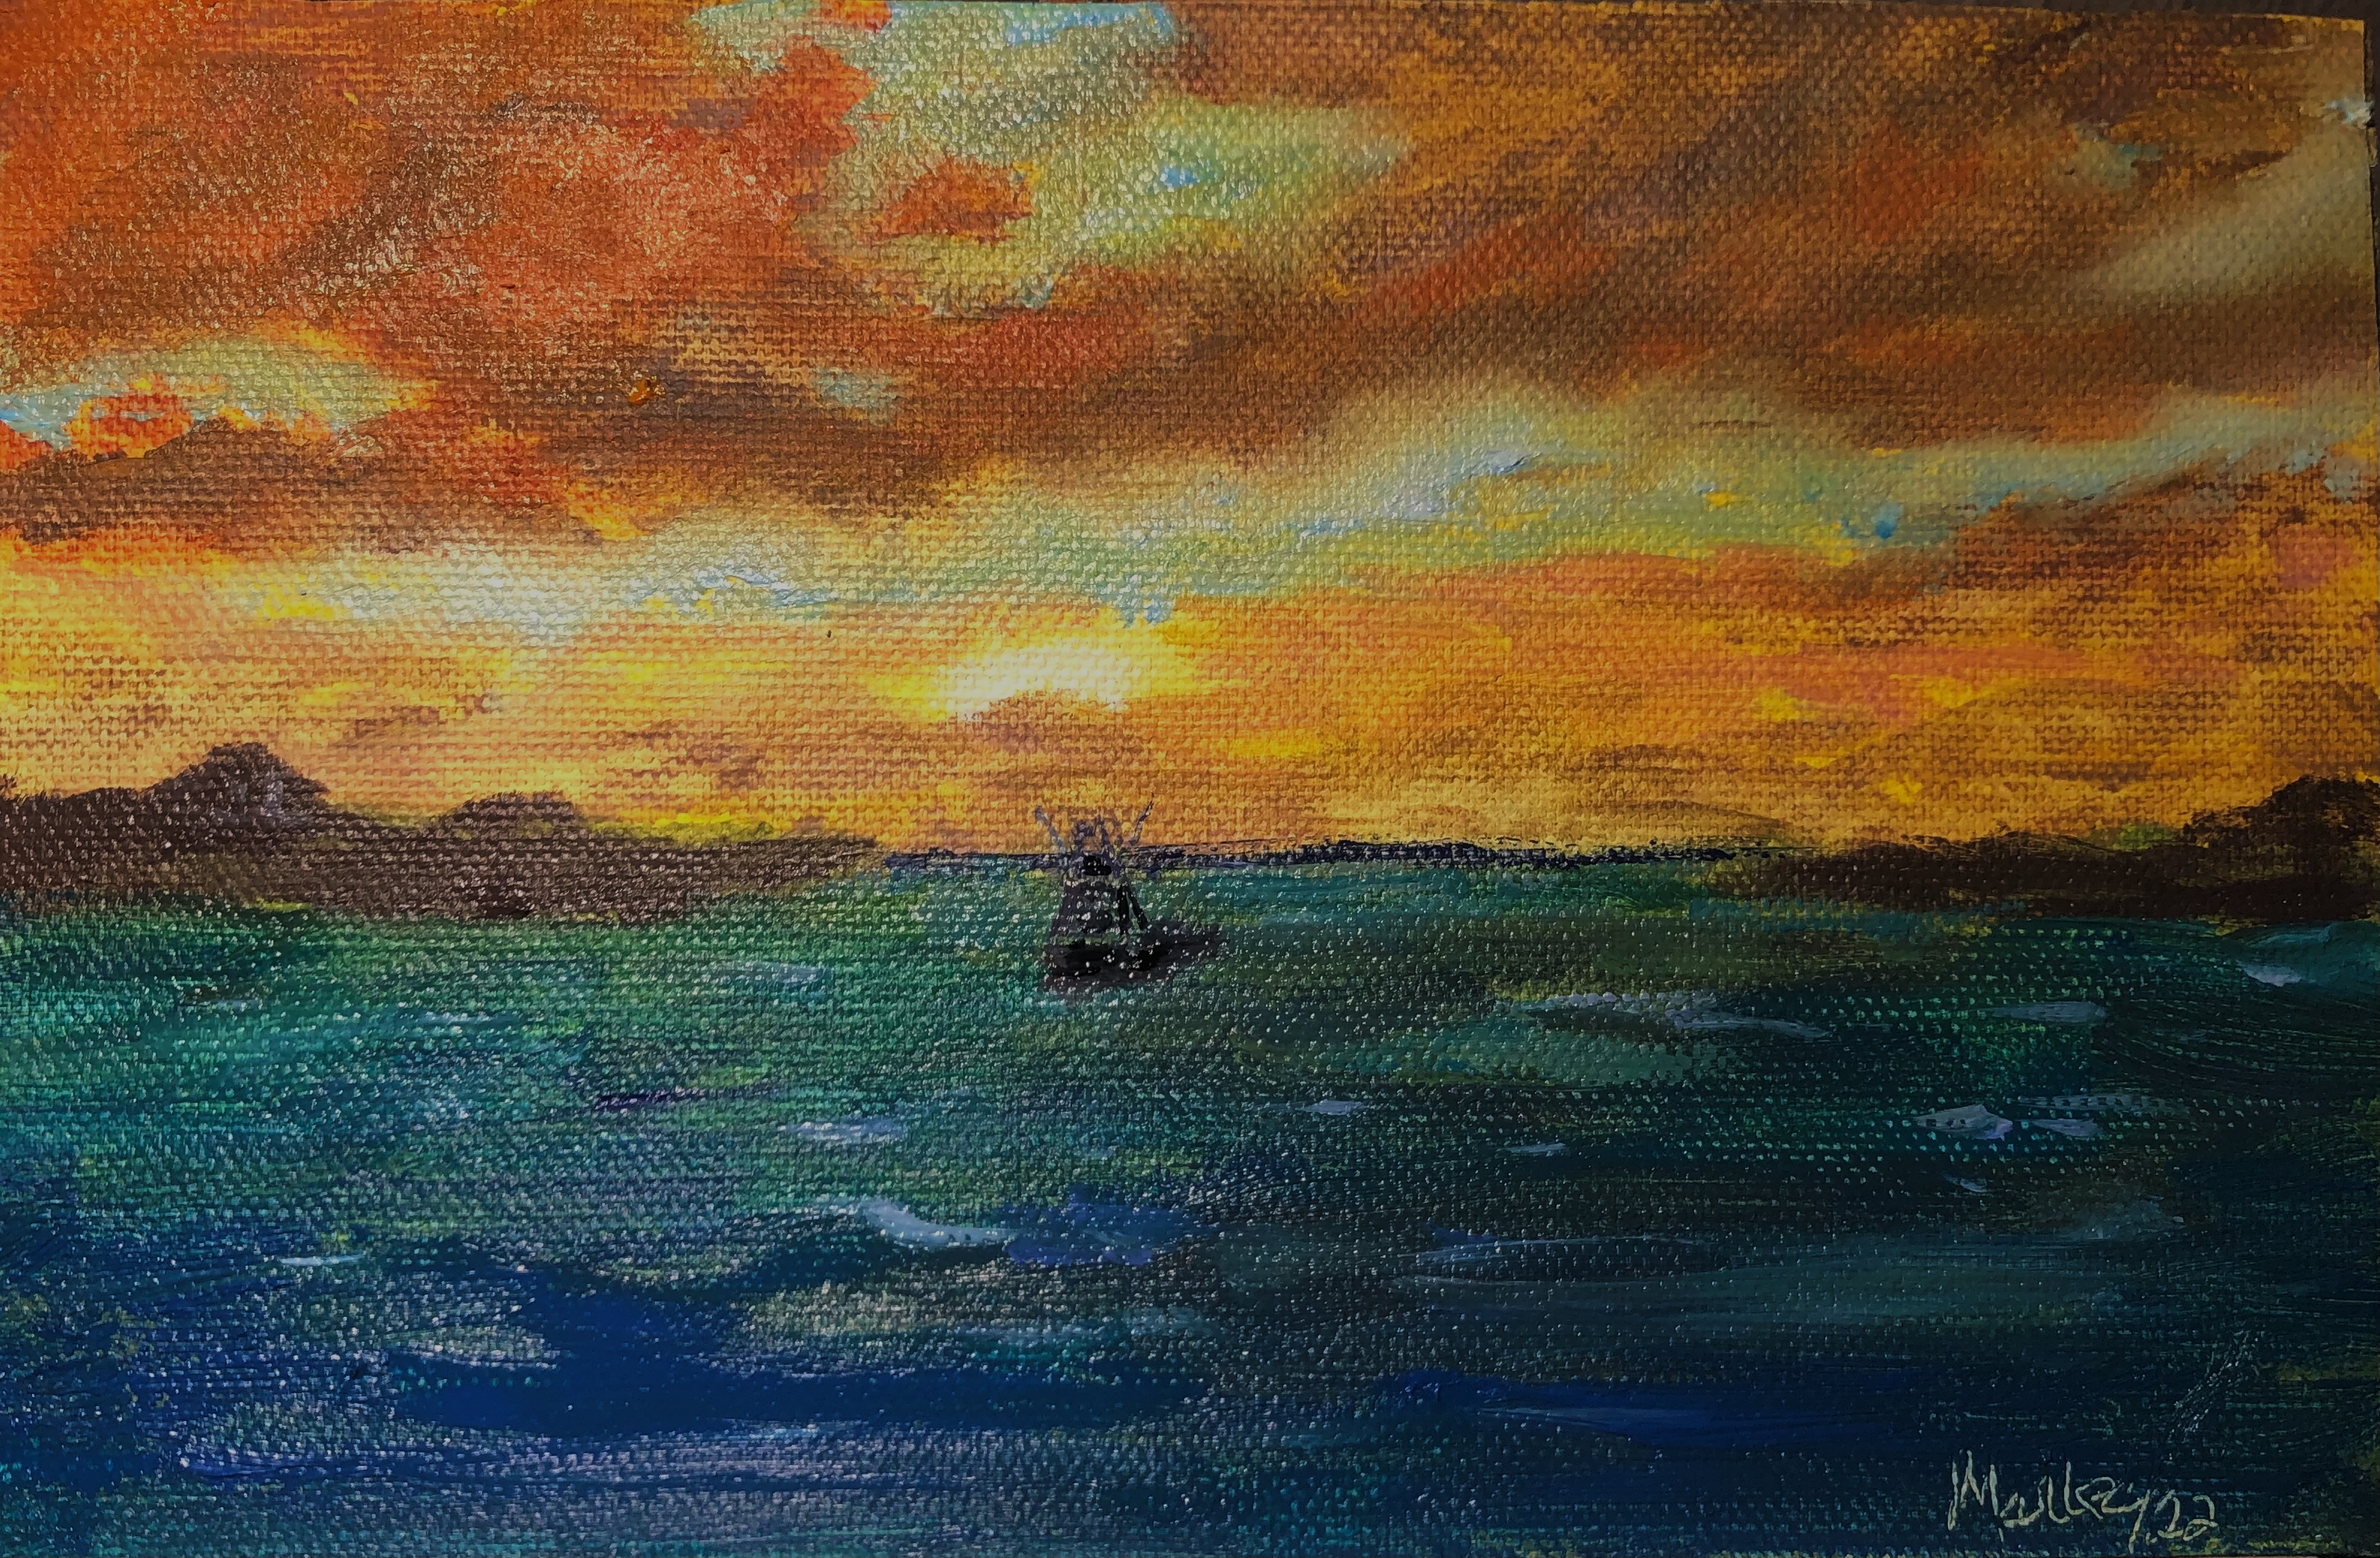 Oil Painting on Canvas 8x5.  This is the early morning call to win in a fishing tournament as the early boats get to their most favoured spots on the ocean and attempt to bring in the winning catch.  